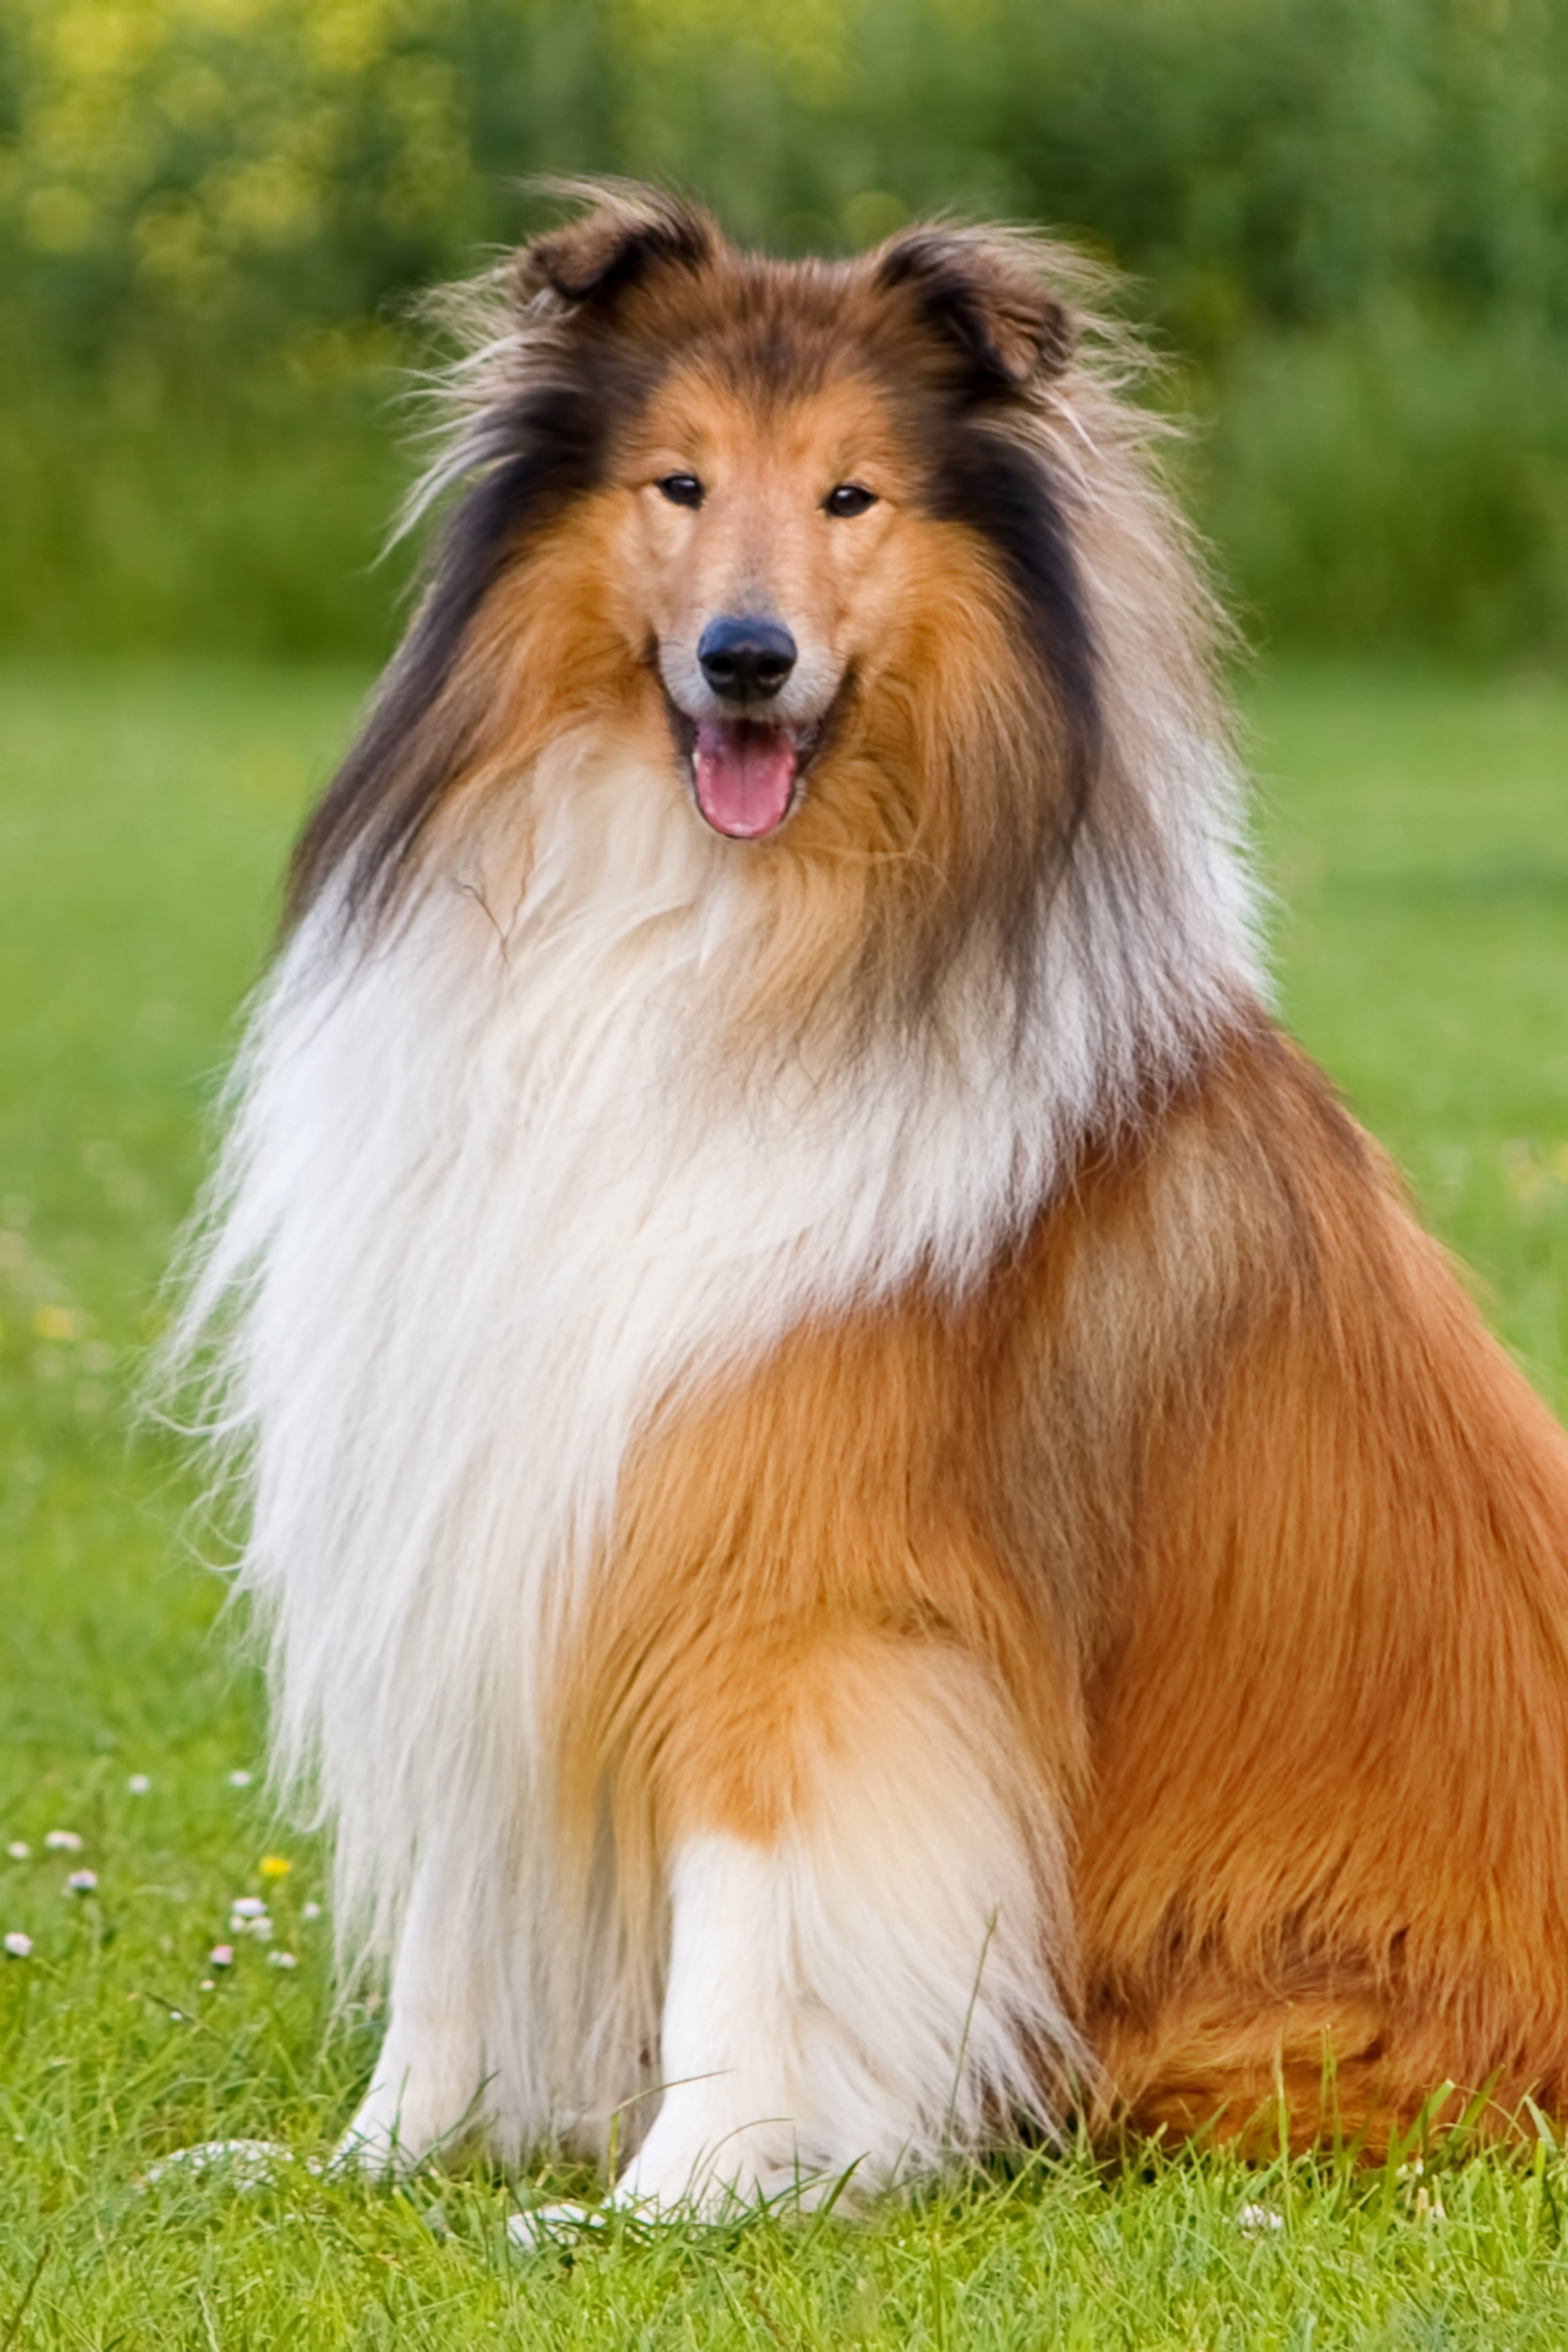 Collie, Long Haired, Pet, Animal, Dog, dog, grass